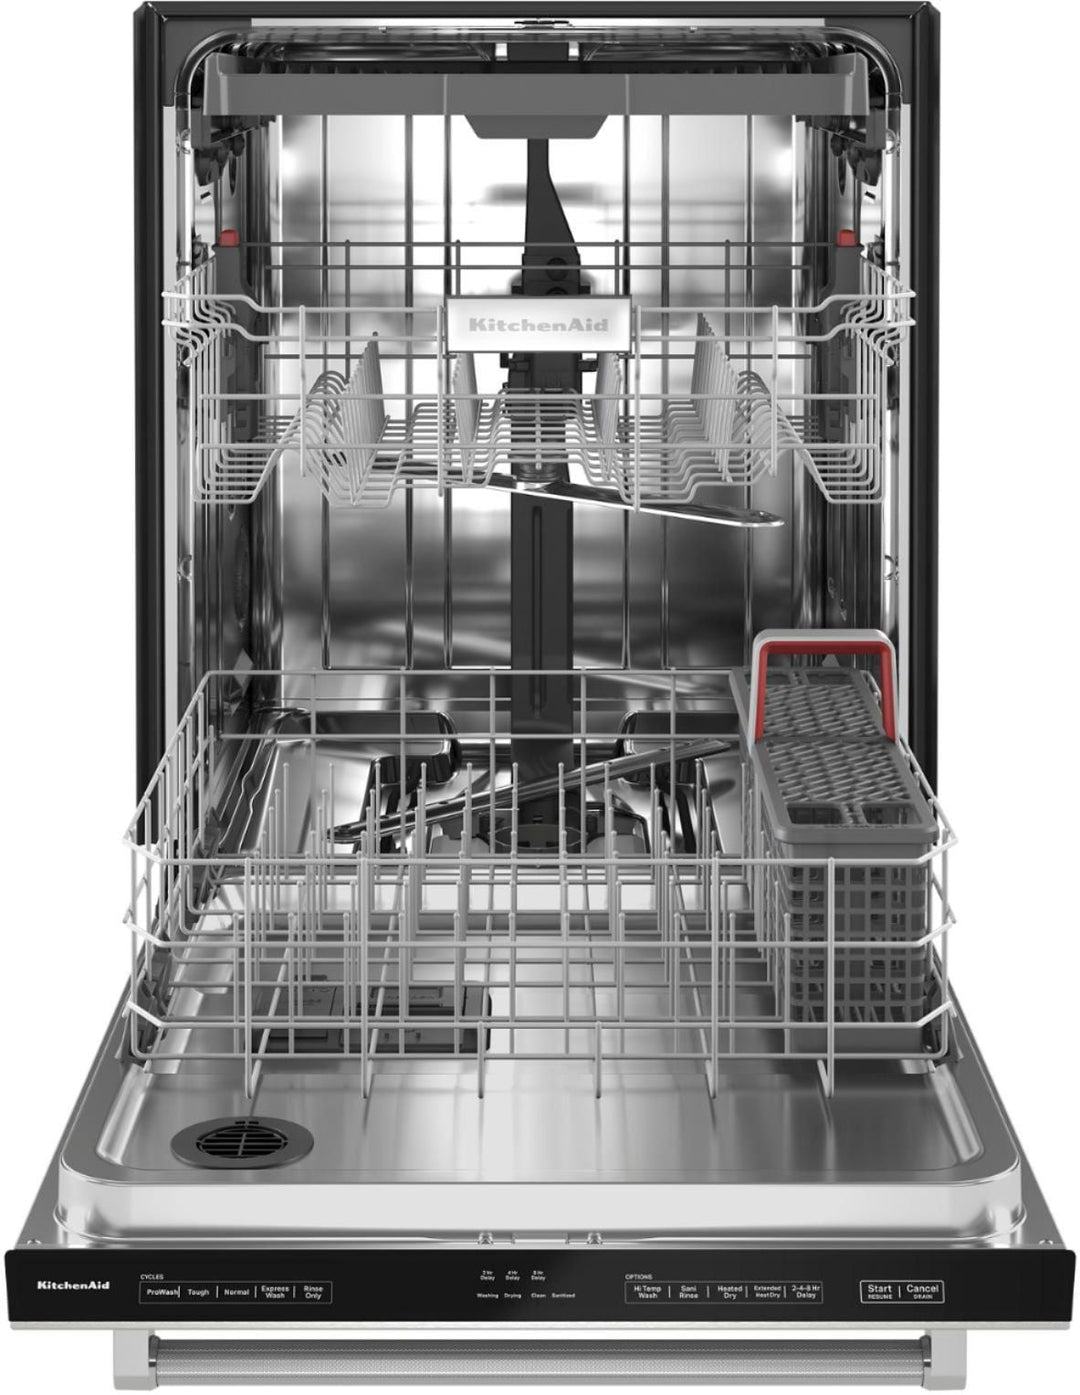 KitchenAid - 24" Top Control Built-In Dishwasher with Stainless Steel Tub, PrintShield Finish, 3rd Rack, 39 dBA - Stainless Steel with PrintShield Finish_10